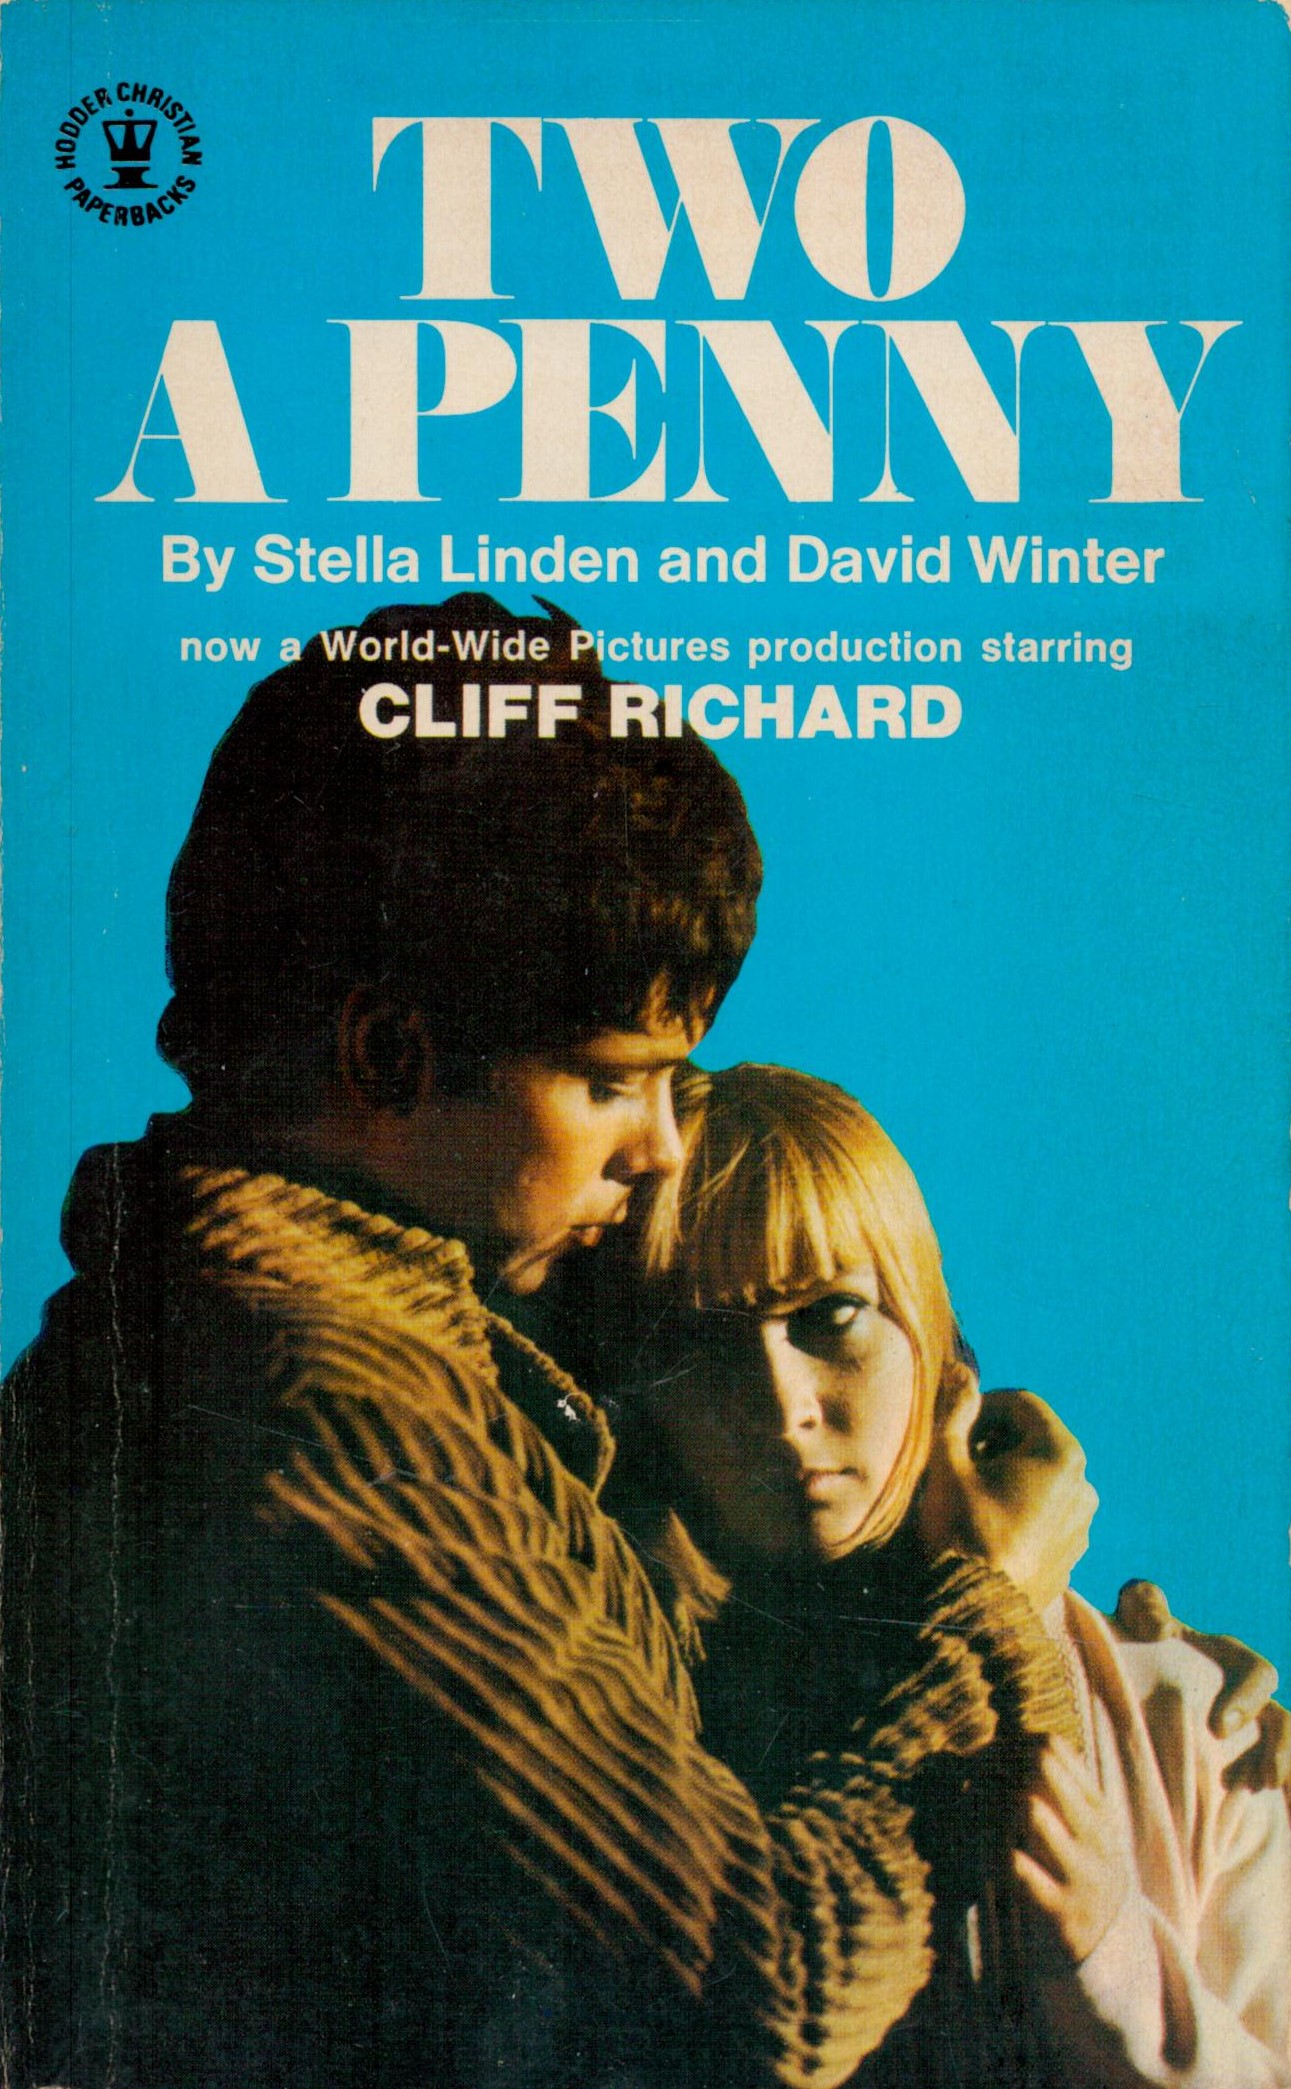 Cliff Richard Signed 1st Ed Paperback Book Titled Two a Penny by Stella Linden and David Winter.